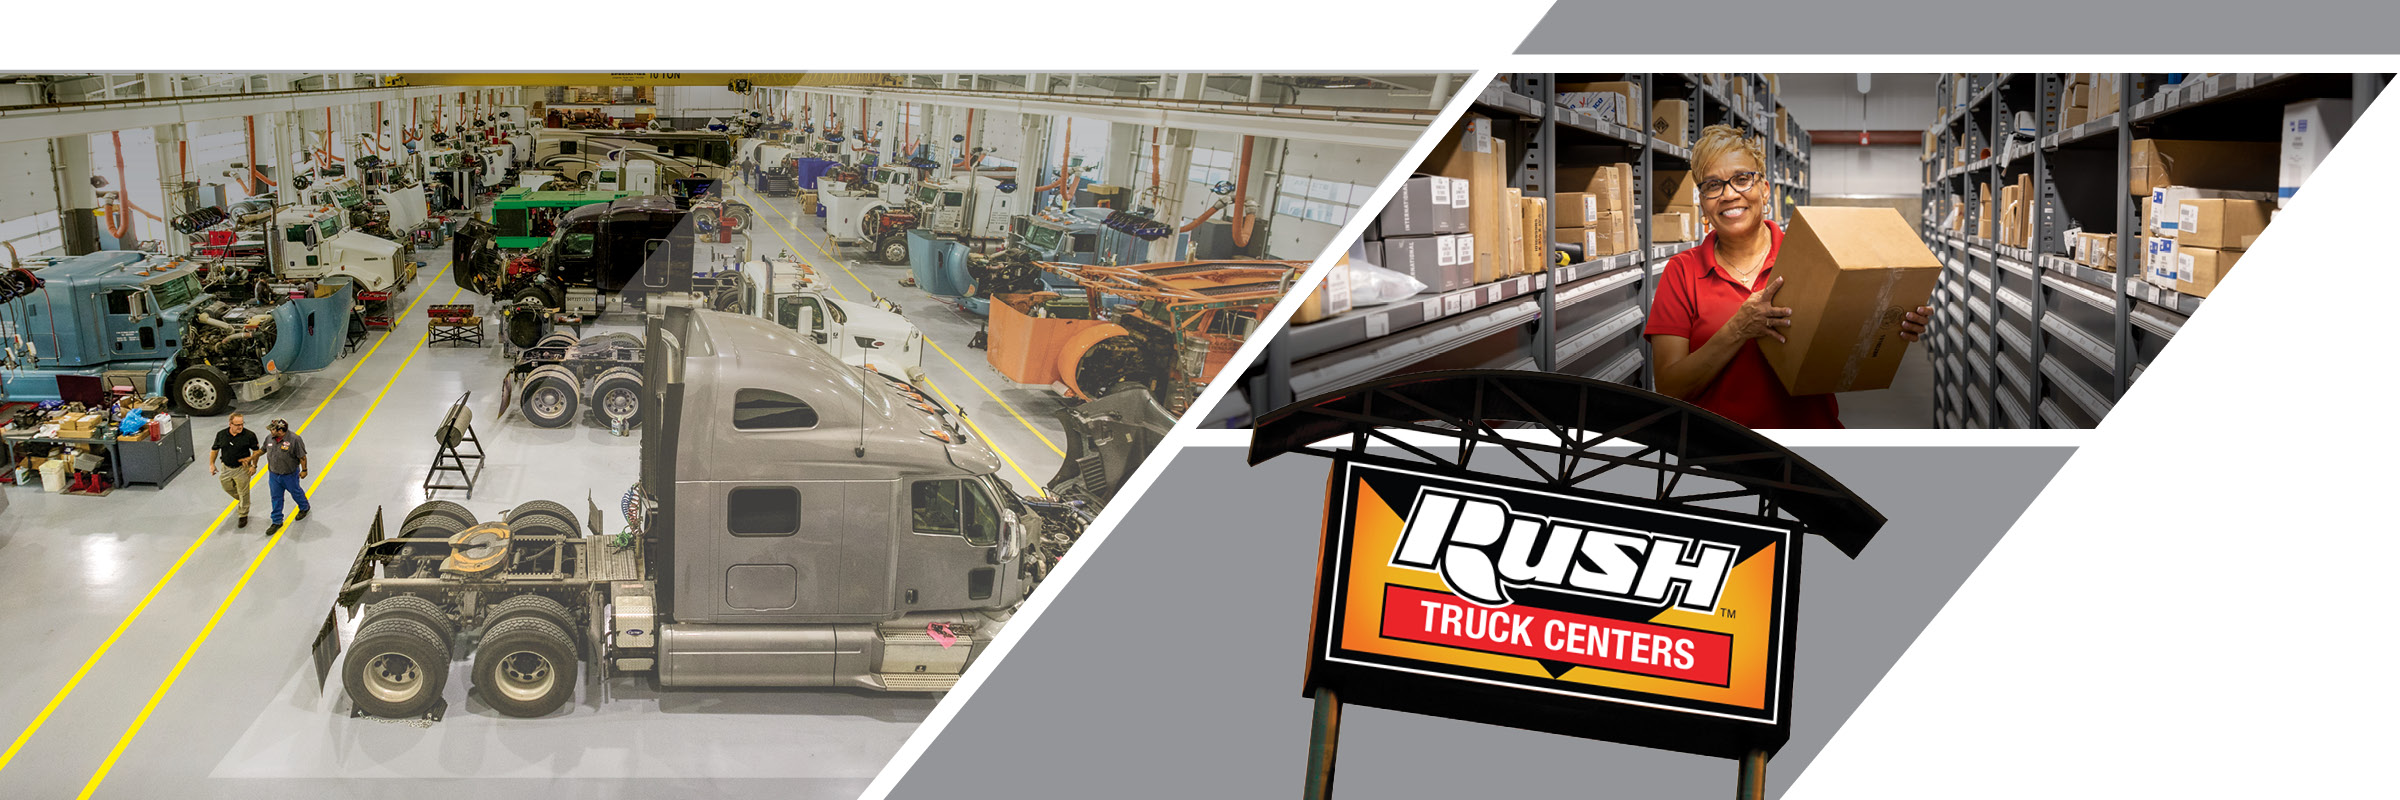 Rush Truck Centers Service Bays and Parts Warehouse